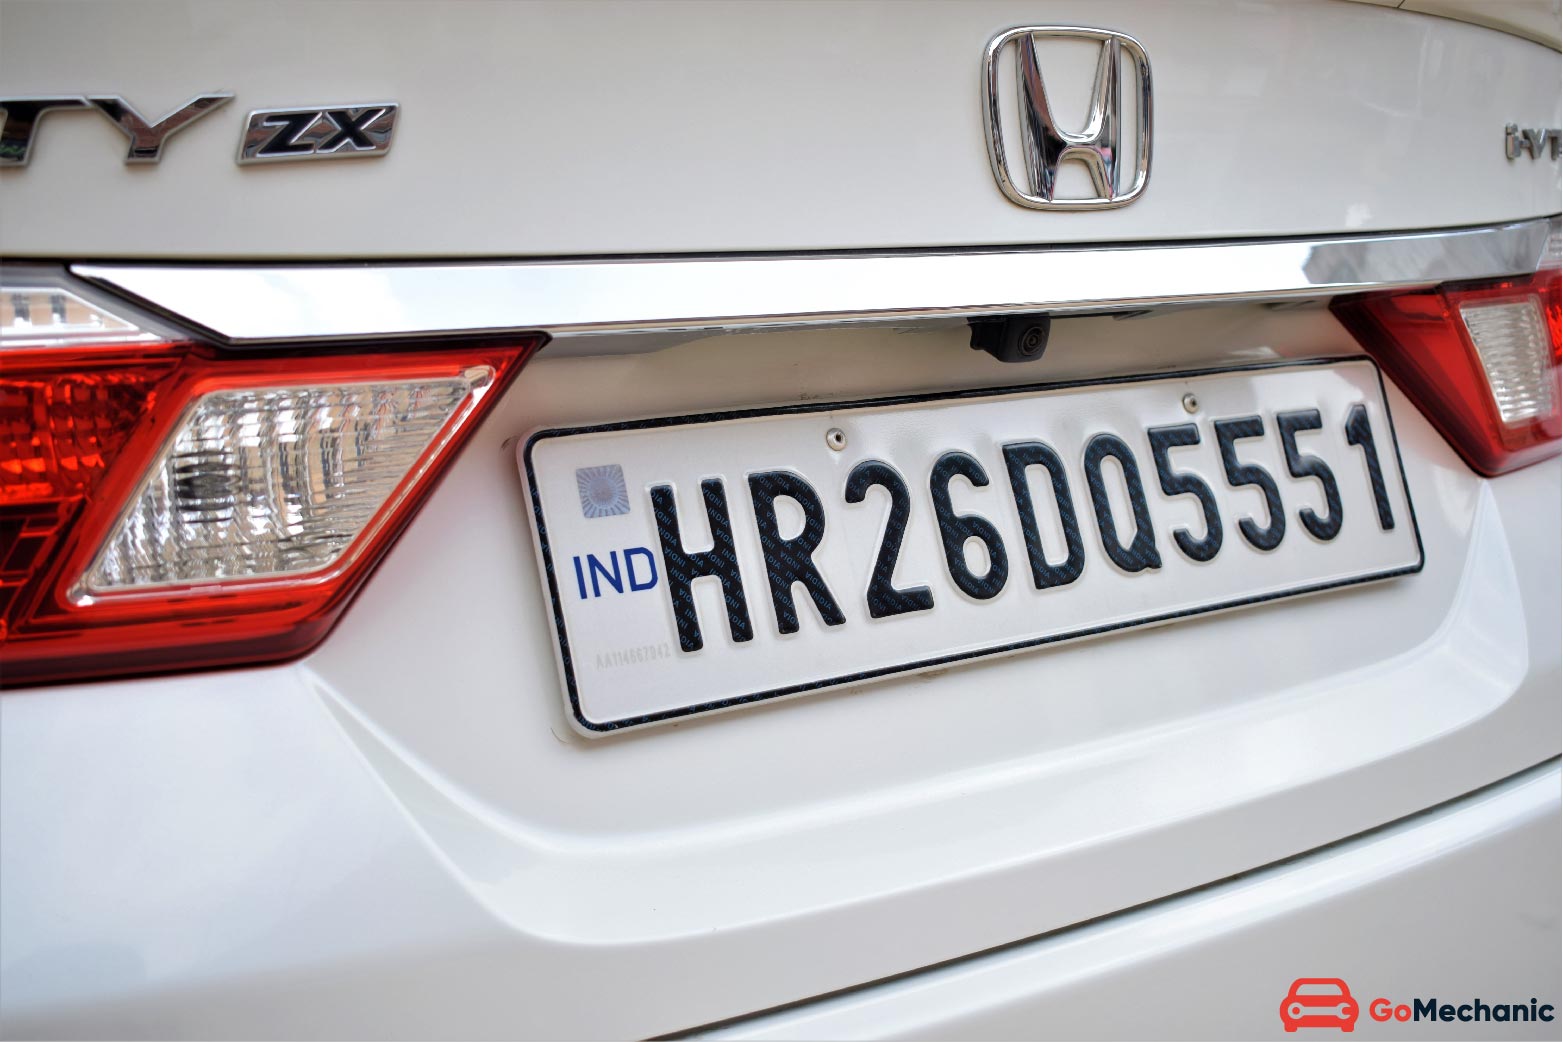 47 Top Act number plate designs New Trend 2022